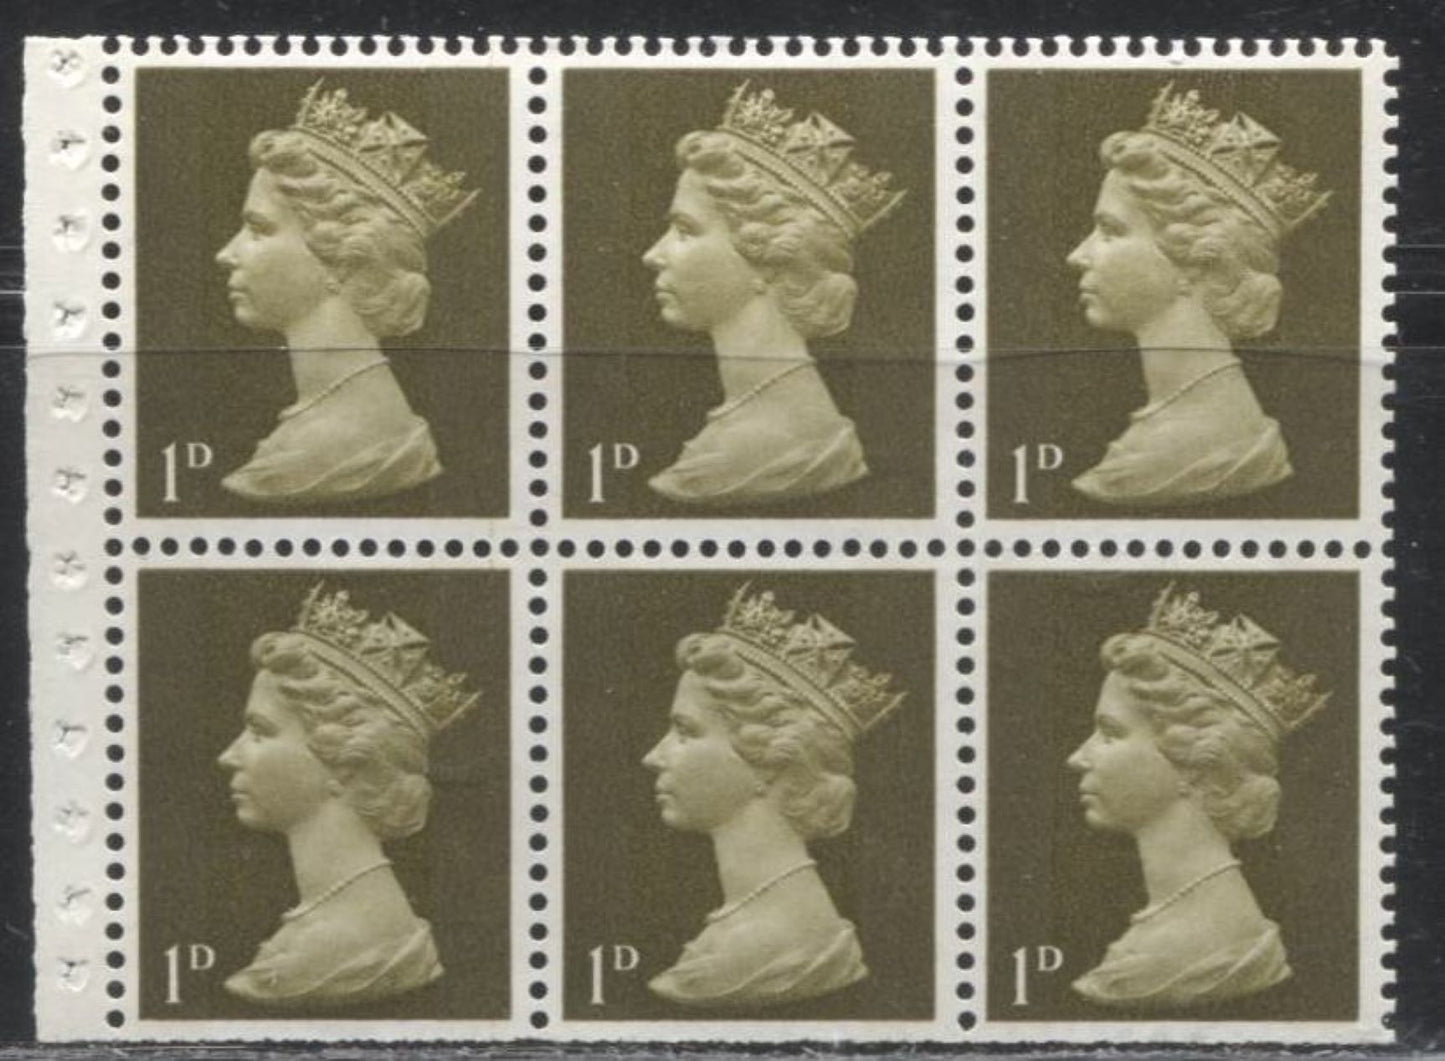 Great Britain SG#LP56 4/6d- Black on Grey Blue 1967-1971 Pre-Decimal Machin Heads Issue, March 1970, Various Fluorescence Levels For Interleaving Pages (Combination A), Low Fluorescent "Victory" Cover on the Front and Medium Fluorescent Back Cover